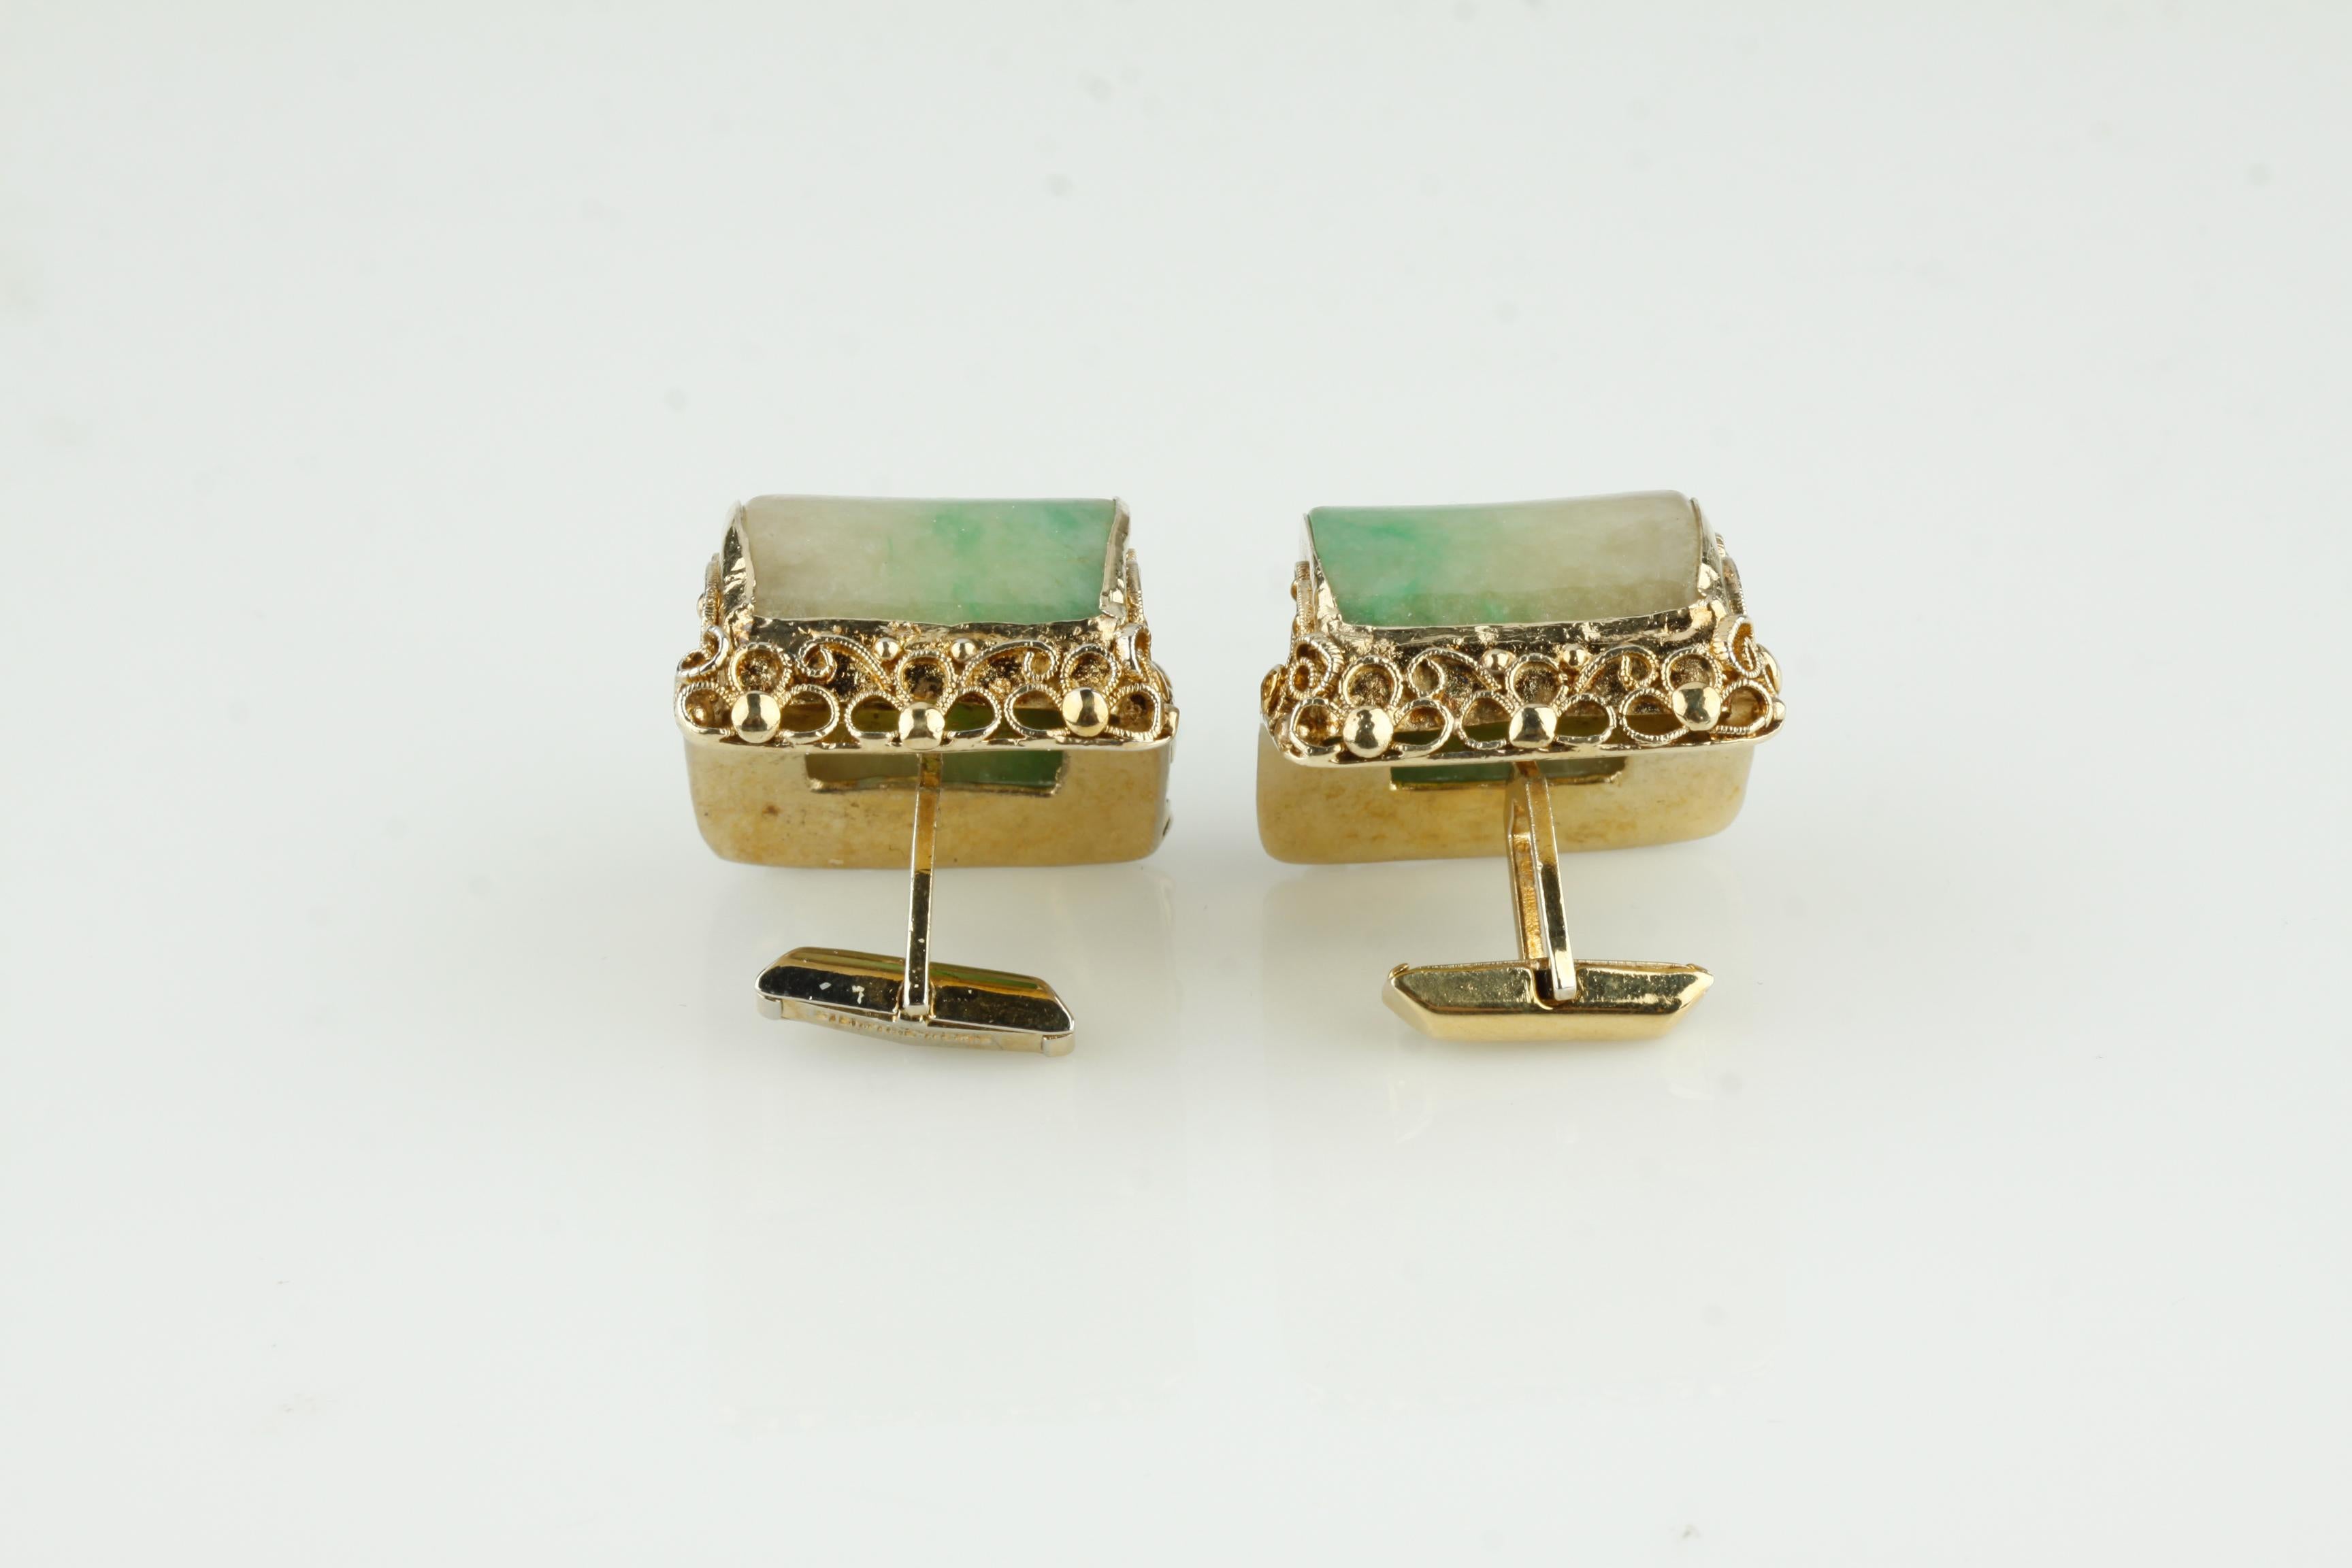 Beautiful Jade Cufflinks
Feature Rounded Jade Stones in Gold-Plated Sterling Silver Settings
Settings Ornate with Filigree
Dimensions of Cufflink = 31 mm Long x 29 mm Wide
Total Mass = 42 grams
Gorgeous Pieces!